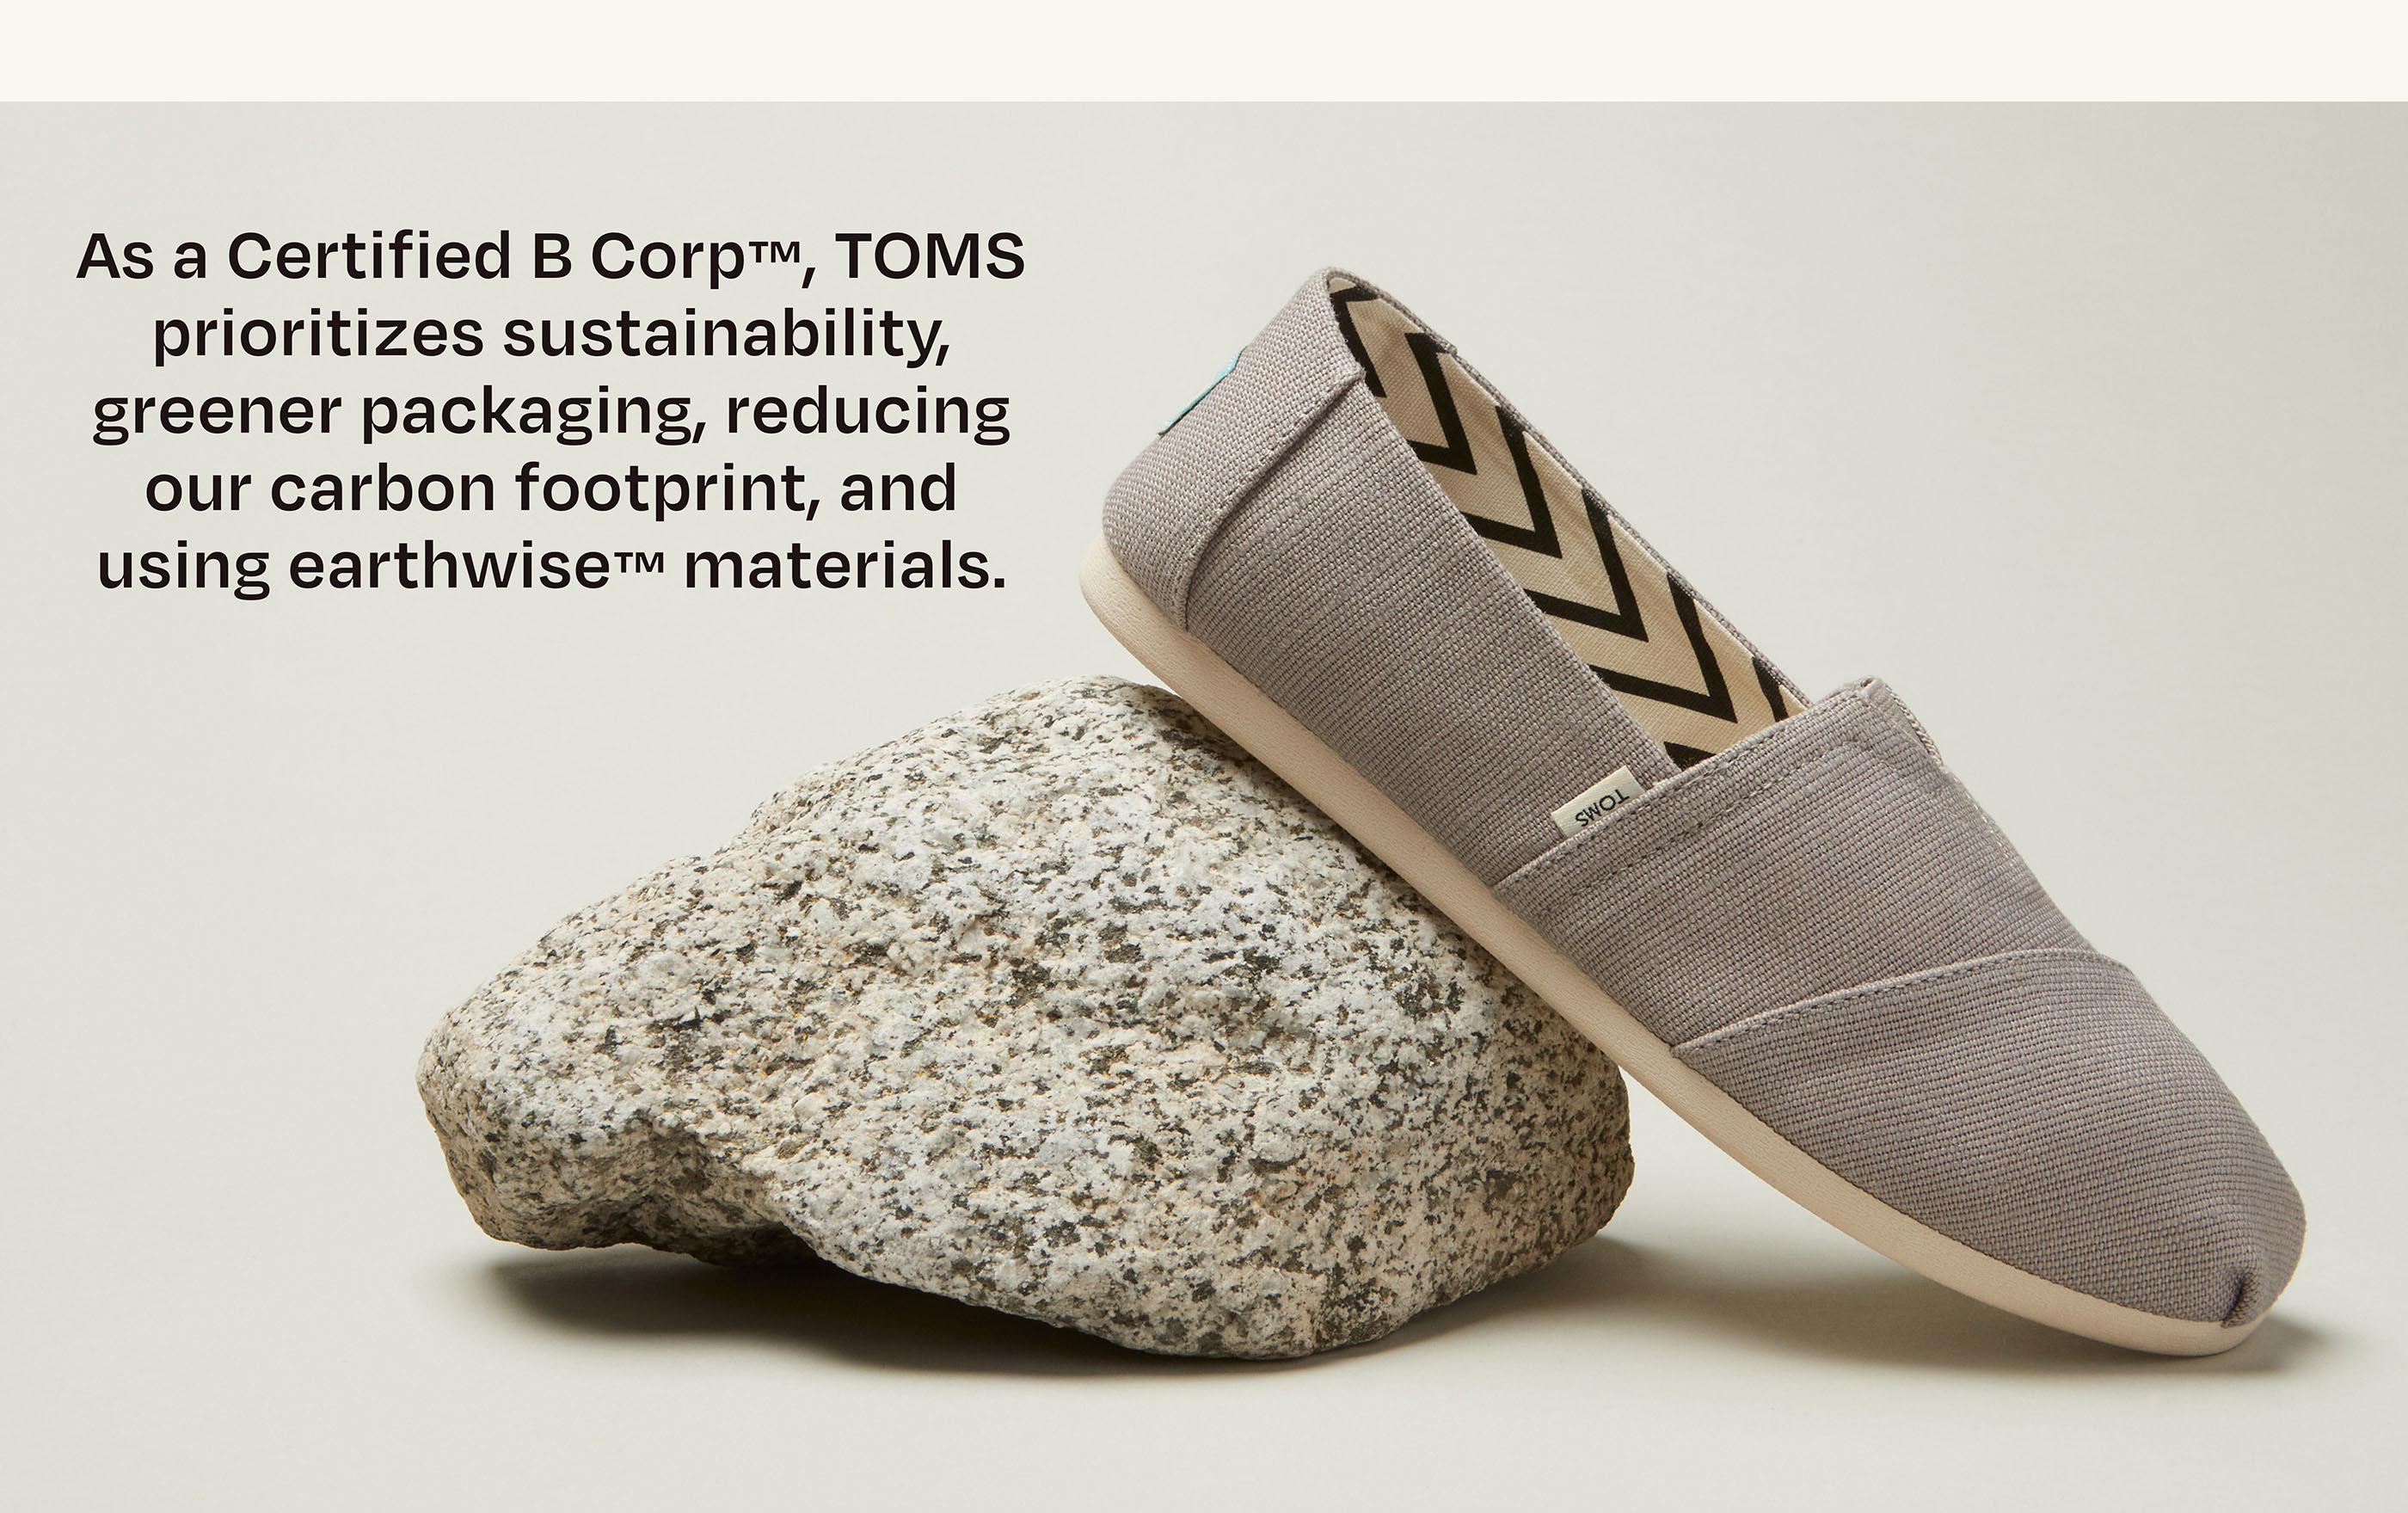 As a Certified B Corp™, TOMS prioritizes sustainability, greener packaging, reducing our carbon footprint, and using earthwise™ materials. The Morning Dove Alpargata Heritage Canvas shown.